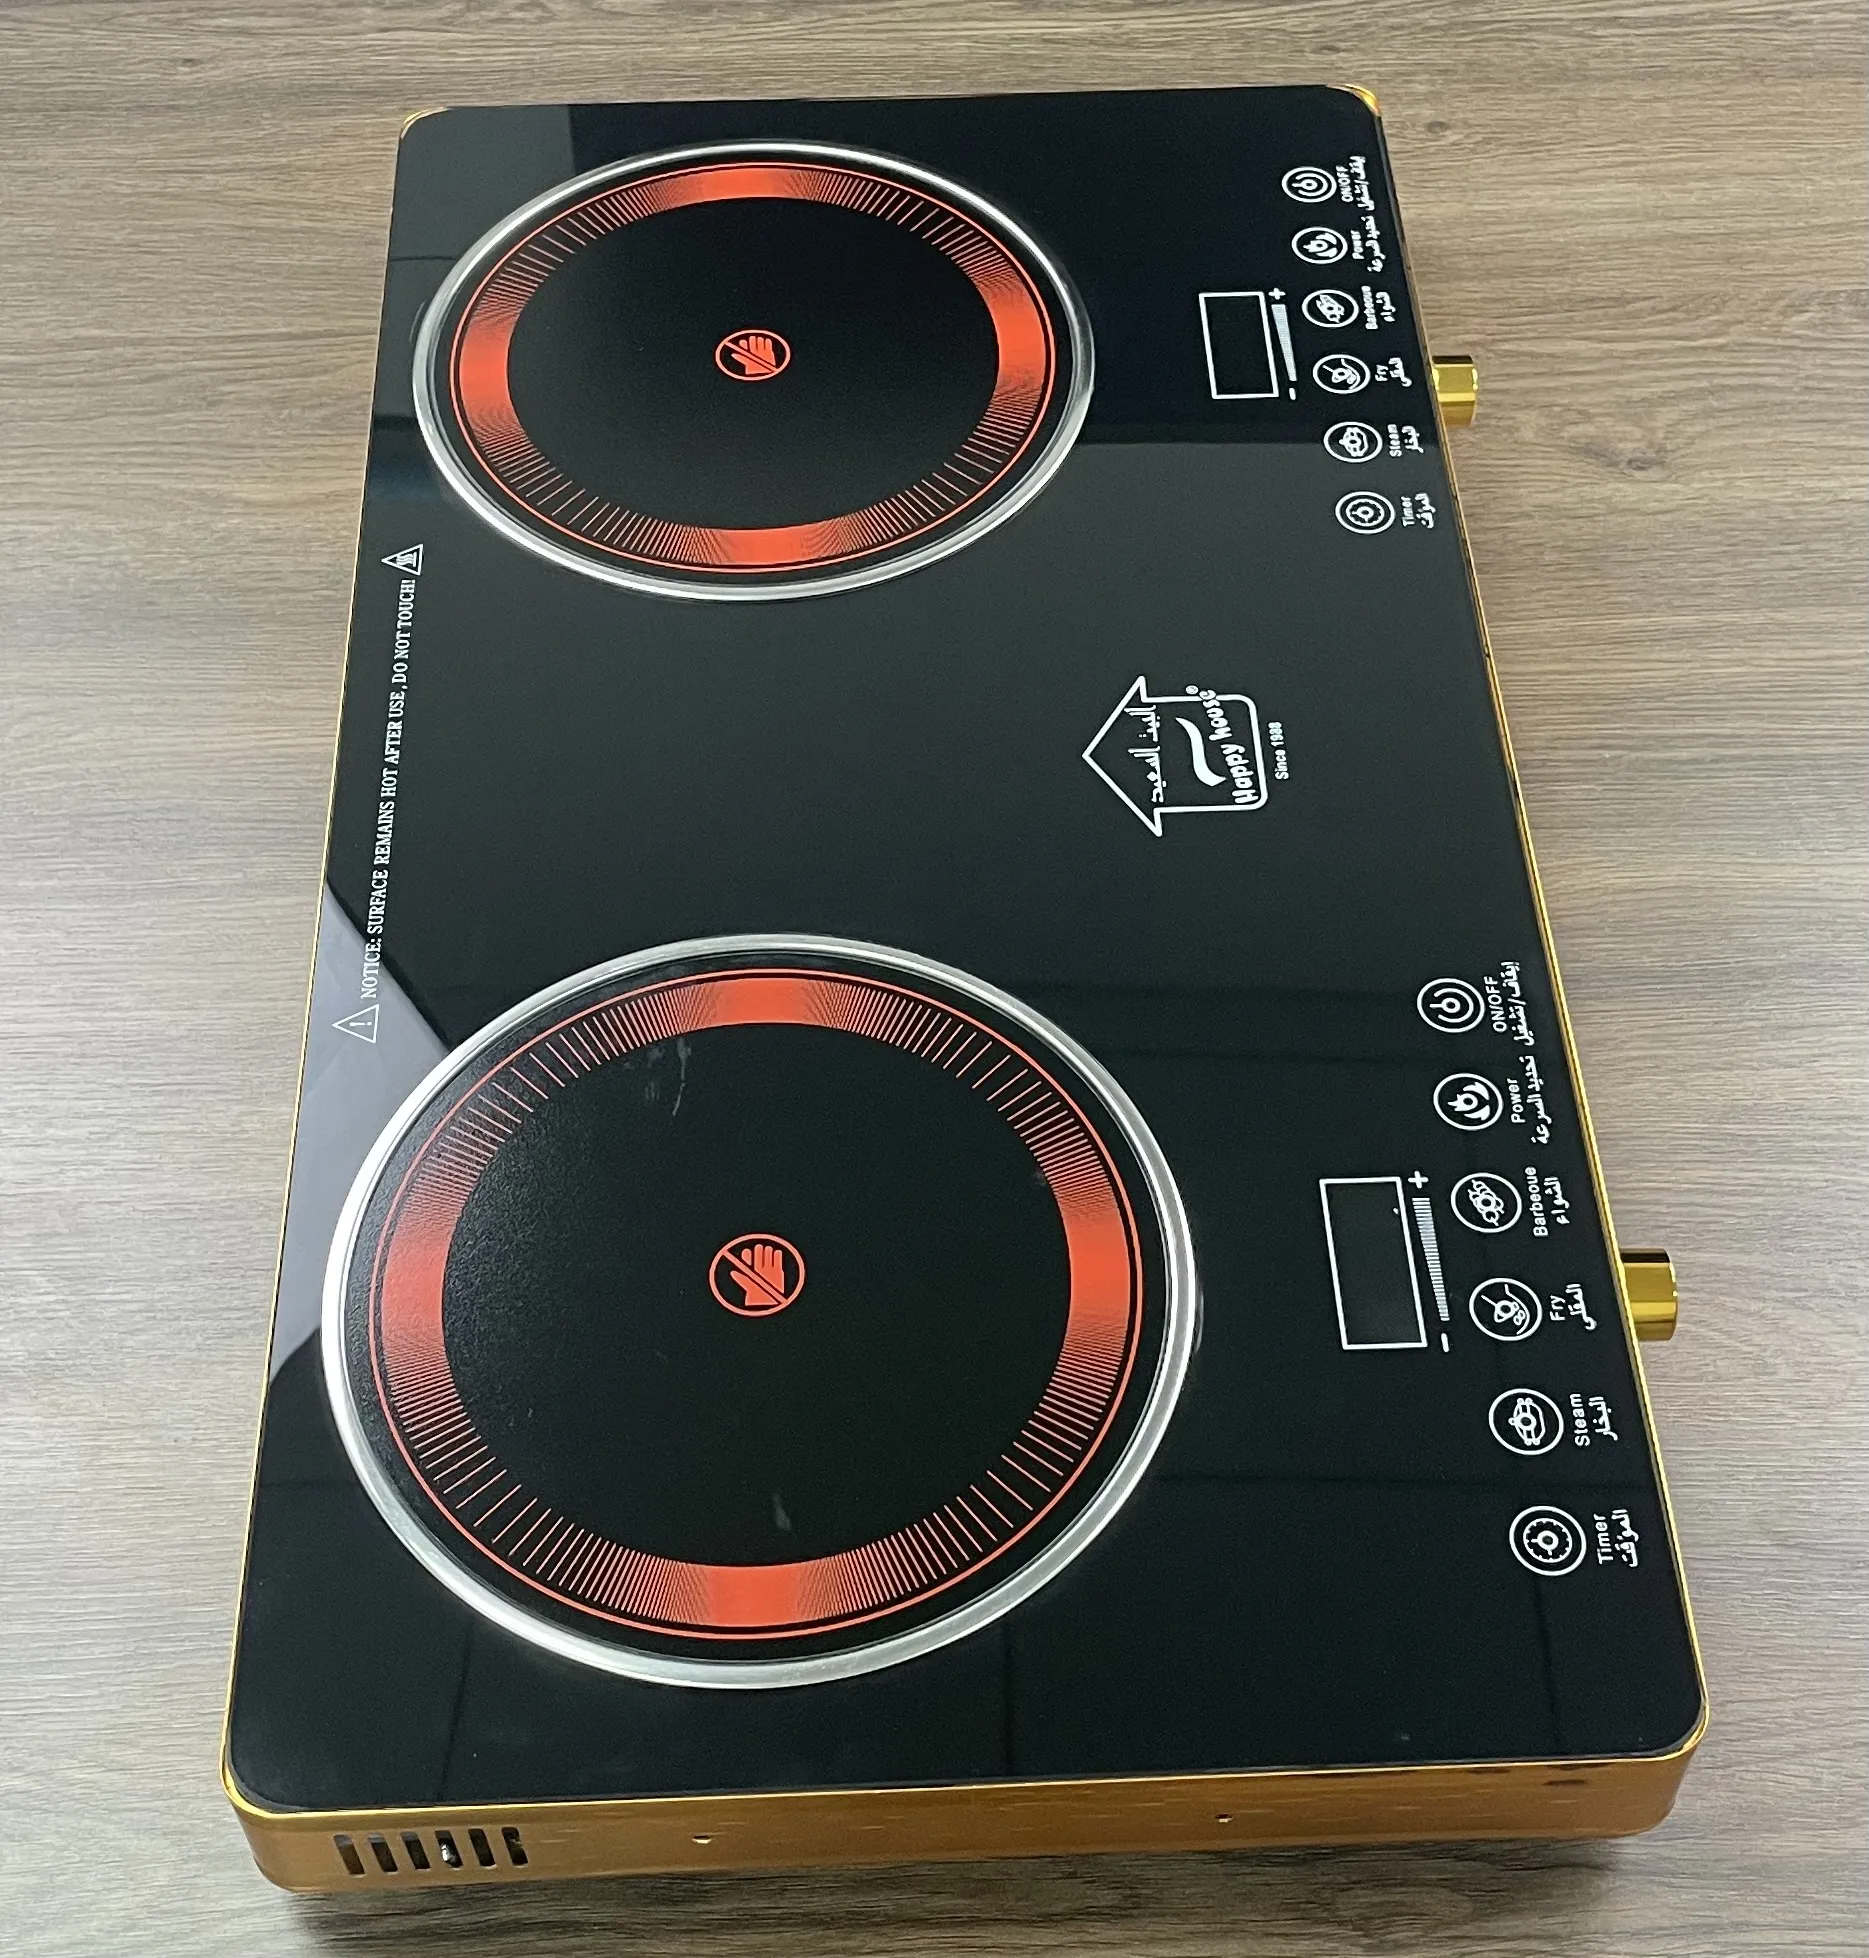 Hot Sell Double Hobs 2 Plate Induction Cooker Two Burners Electric Ceramic Stove Induction Cooktop